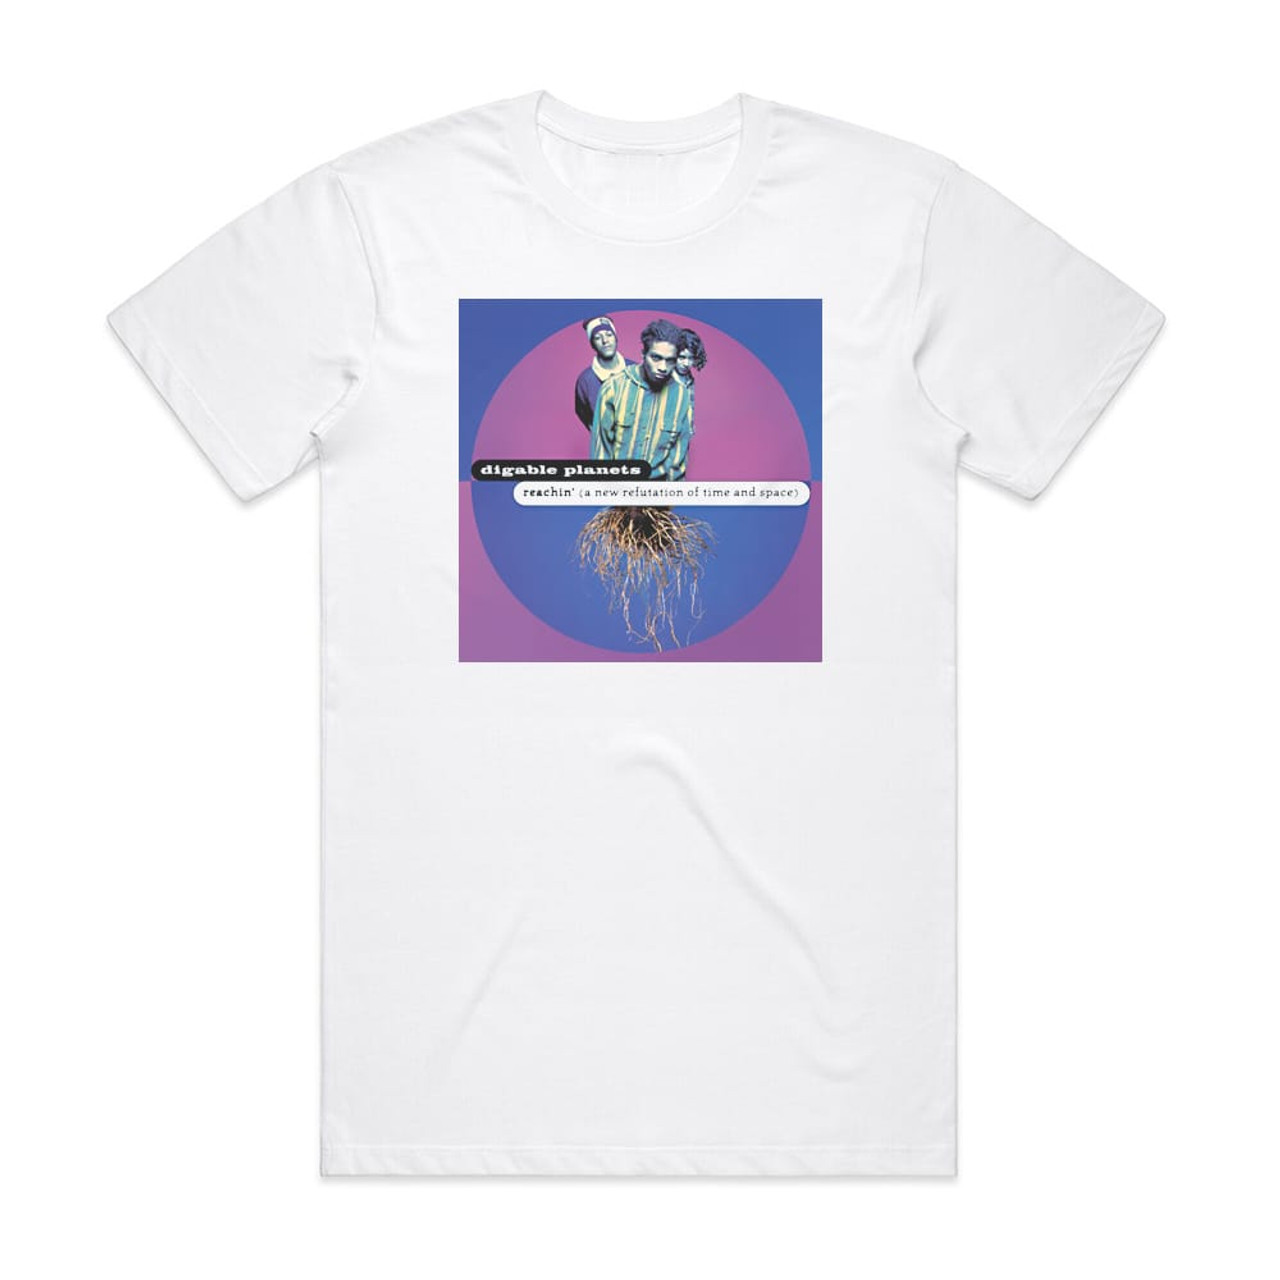 Digable Planets Reachin A New Refutation Of Time And Space Album Cover  T-Shirt White